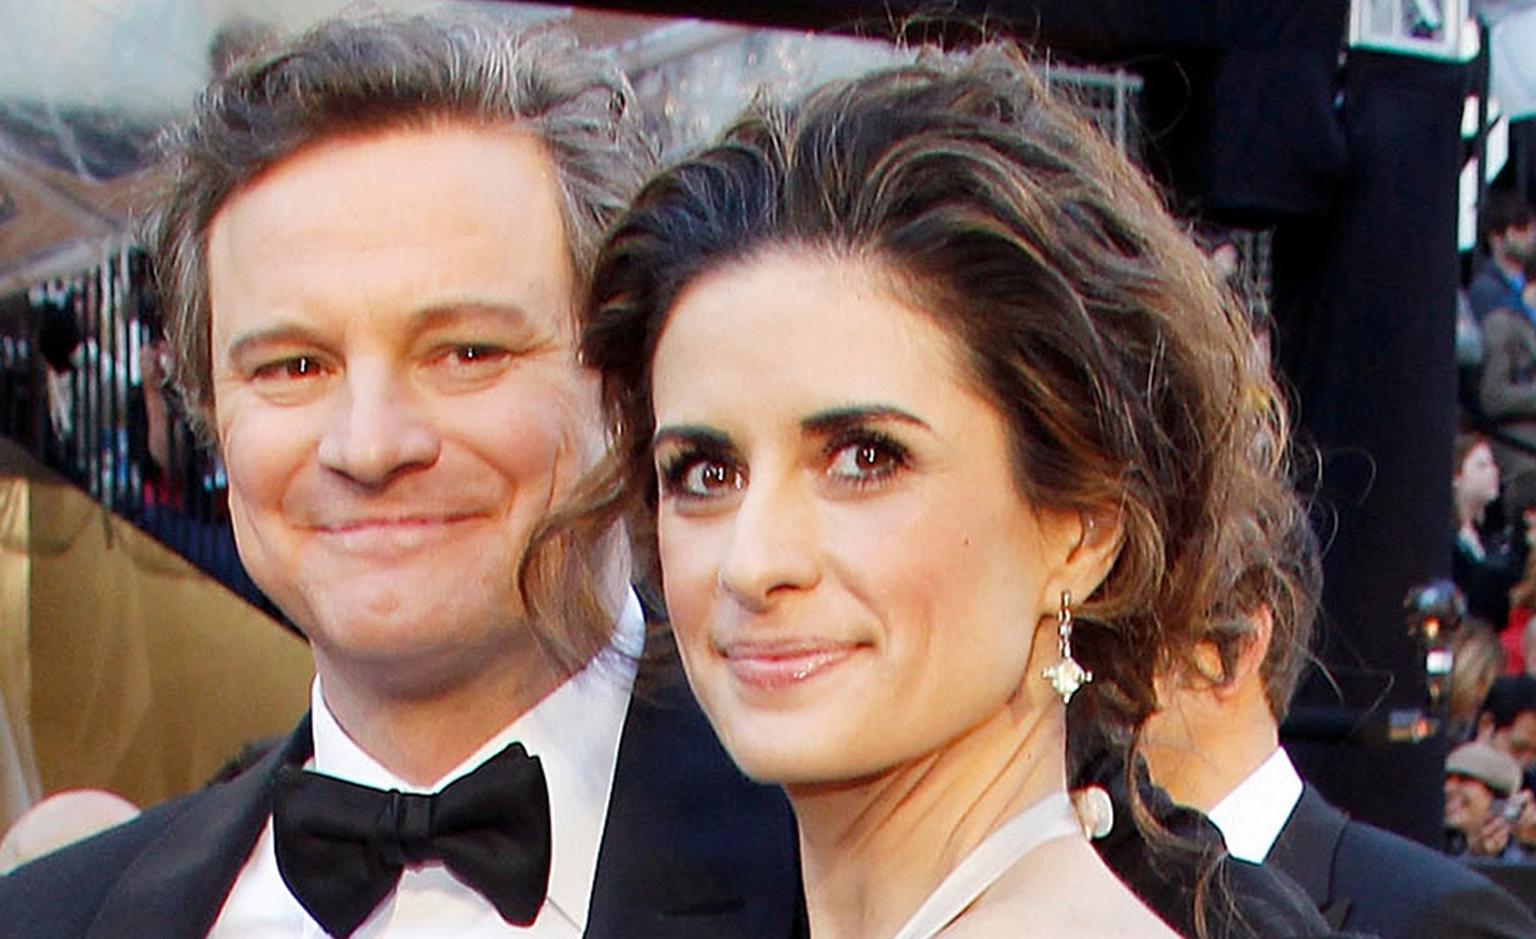 The first Fairtrade gold jewellery is to be seen on the lobes of Livia Firth (née Giuggioli), eco-entrepreneur and wife of Colin Firth. Livia chose Fairtrade and Fairmined gold as she steps out onto the red carpet at the Academy Awards accompany...